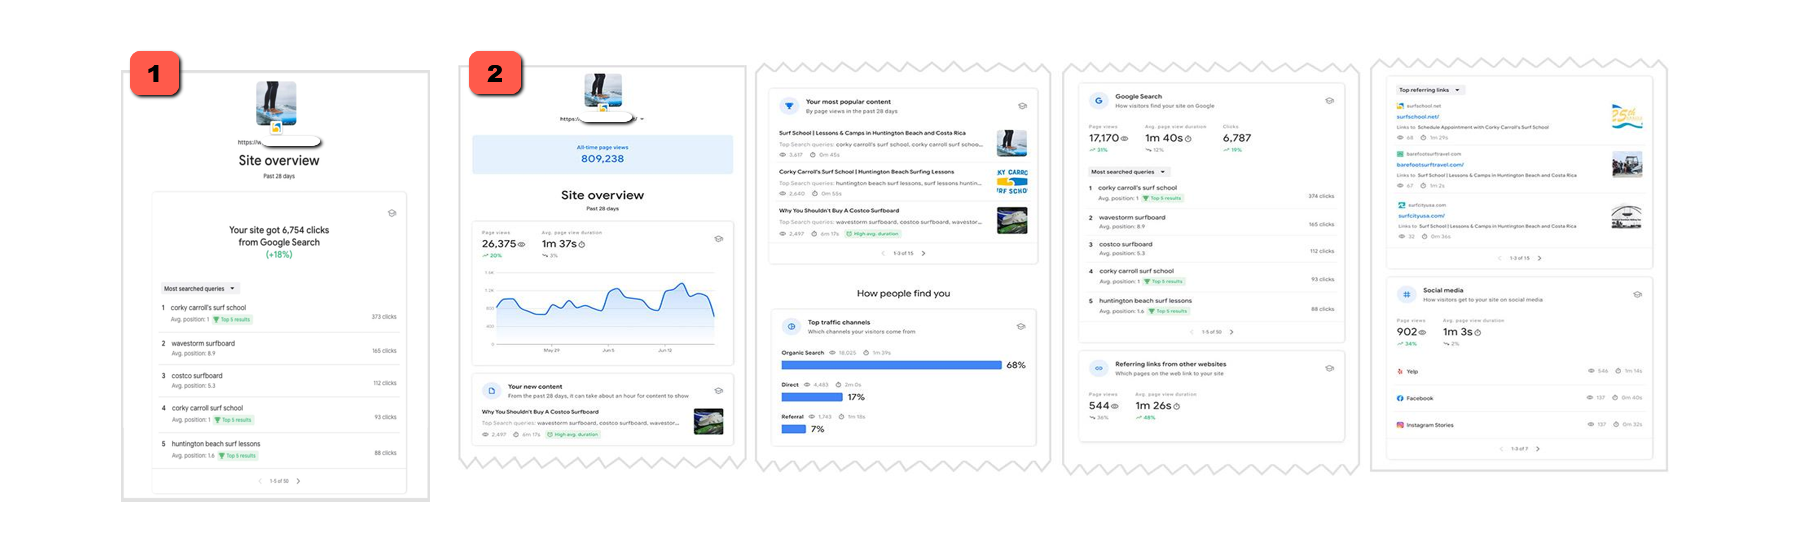 search console insights site overview 2021 06 25 10 40 33